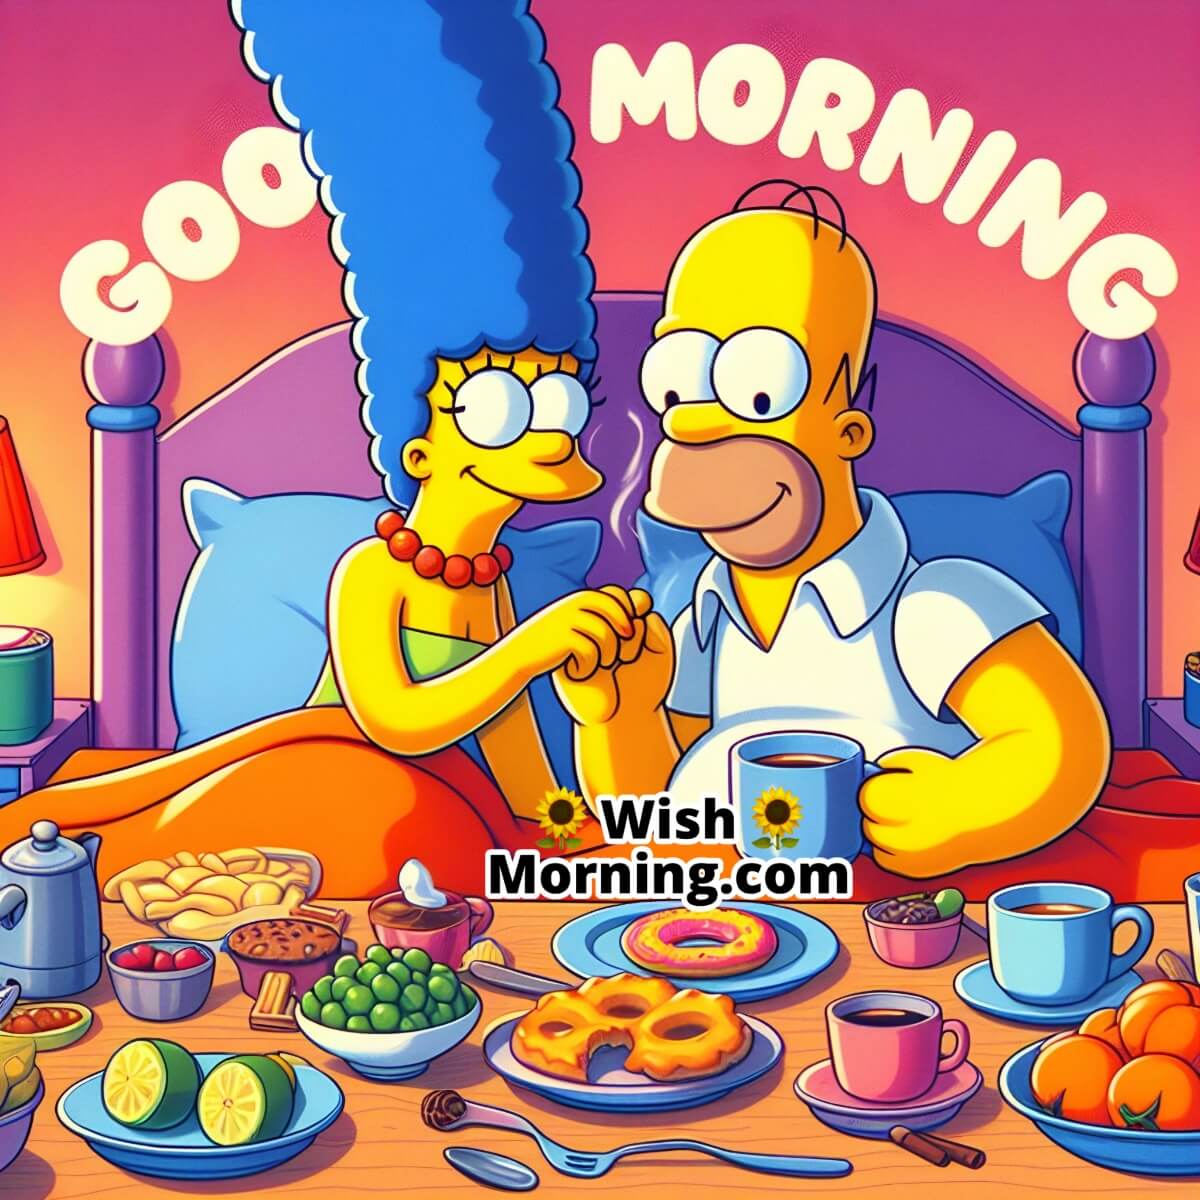 Good Morning Homer Simpson Marge Simpson Images